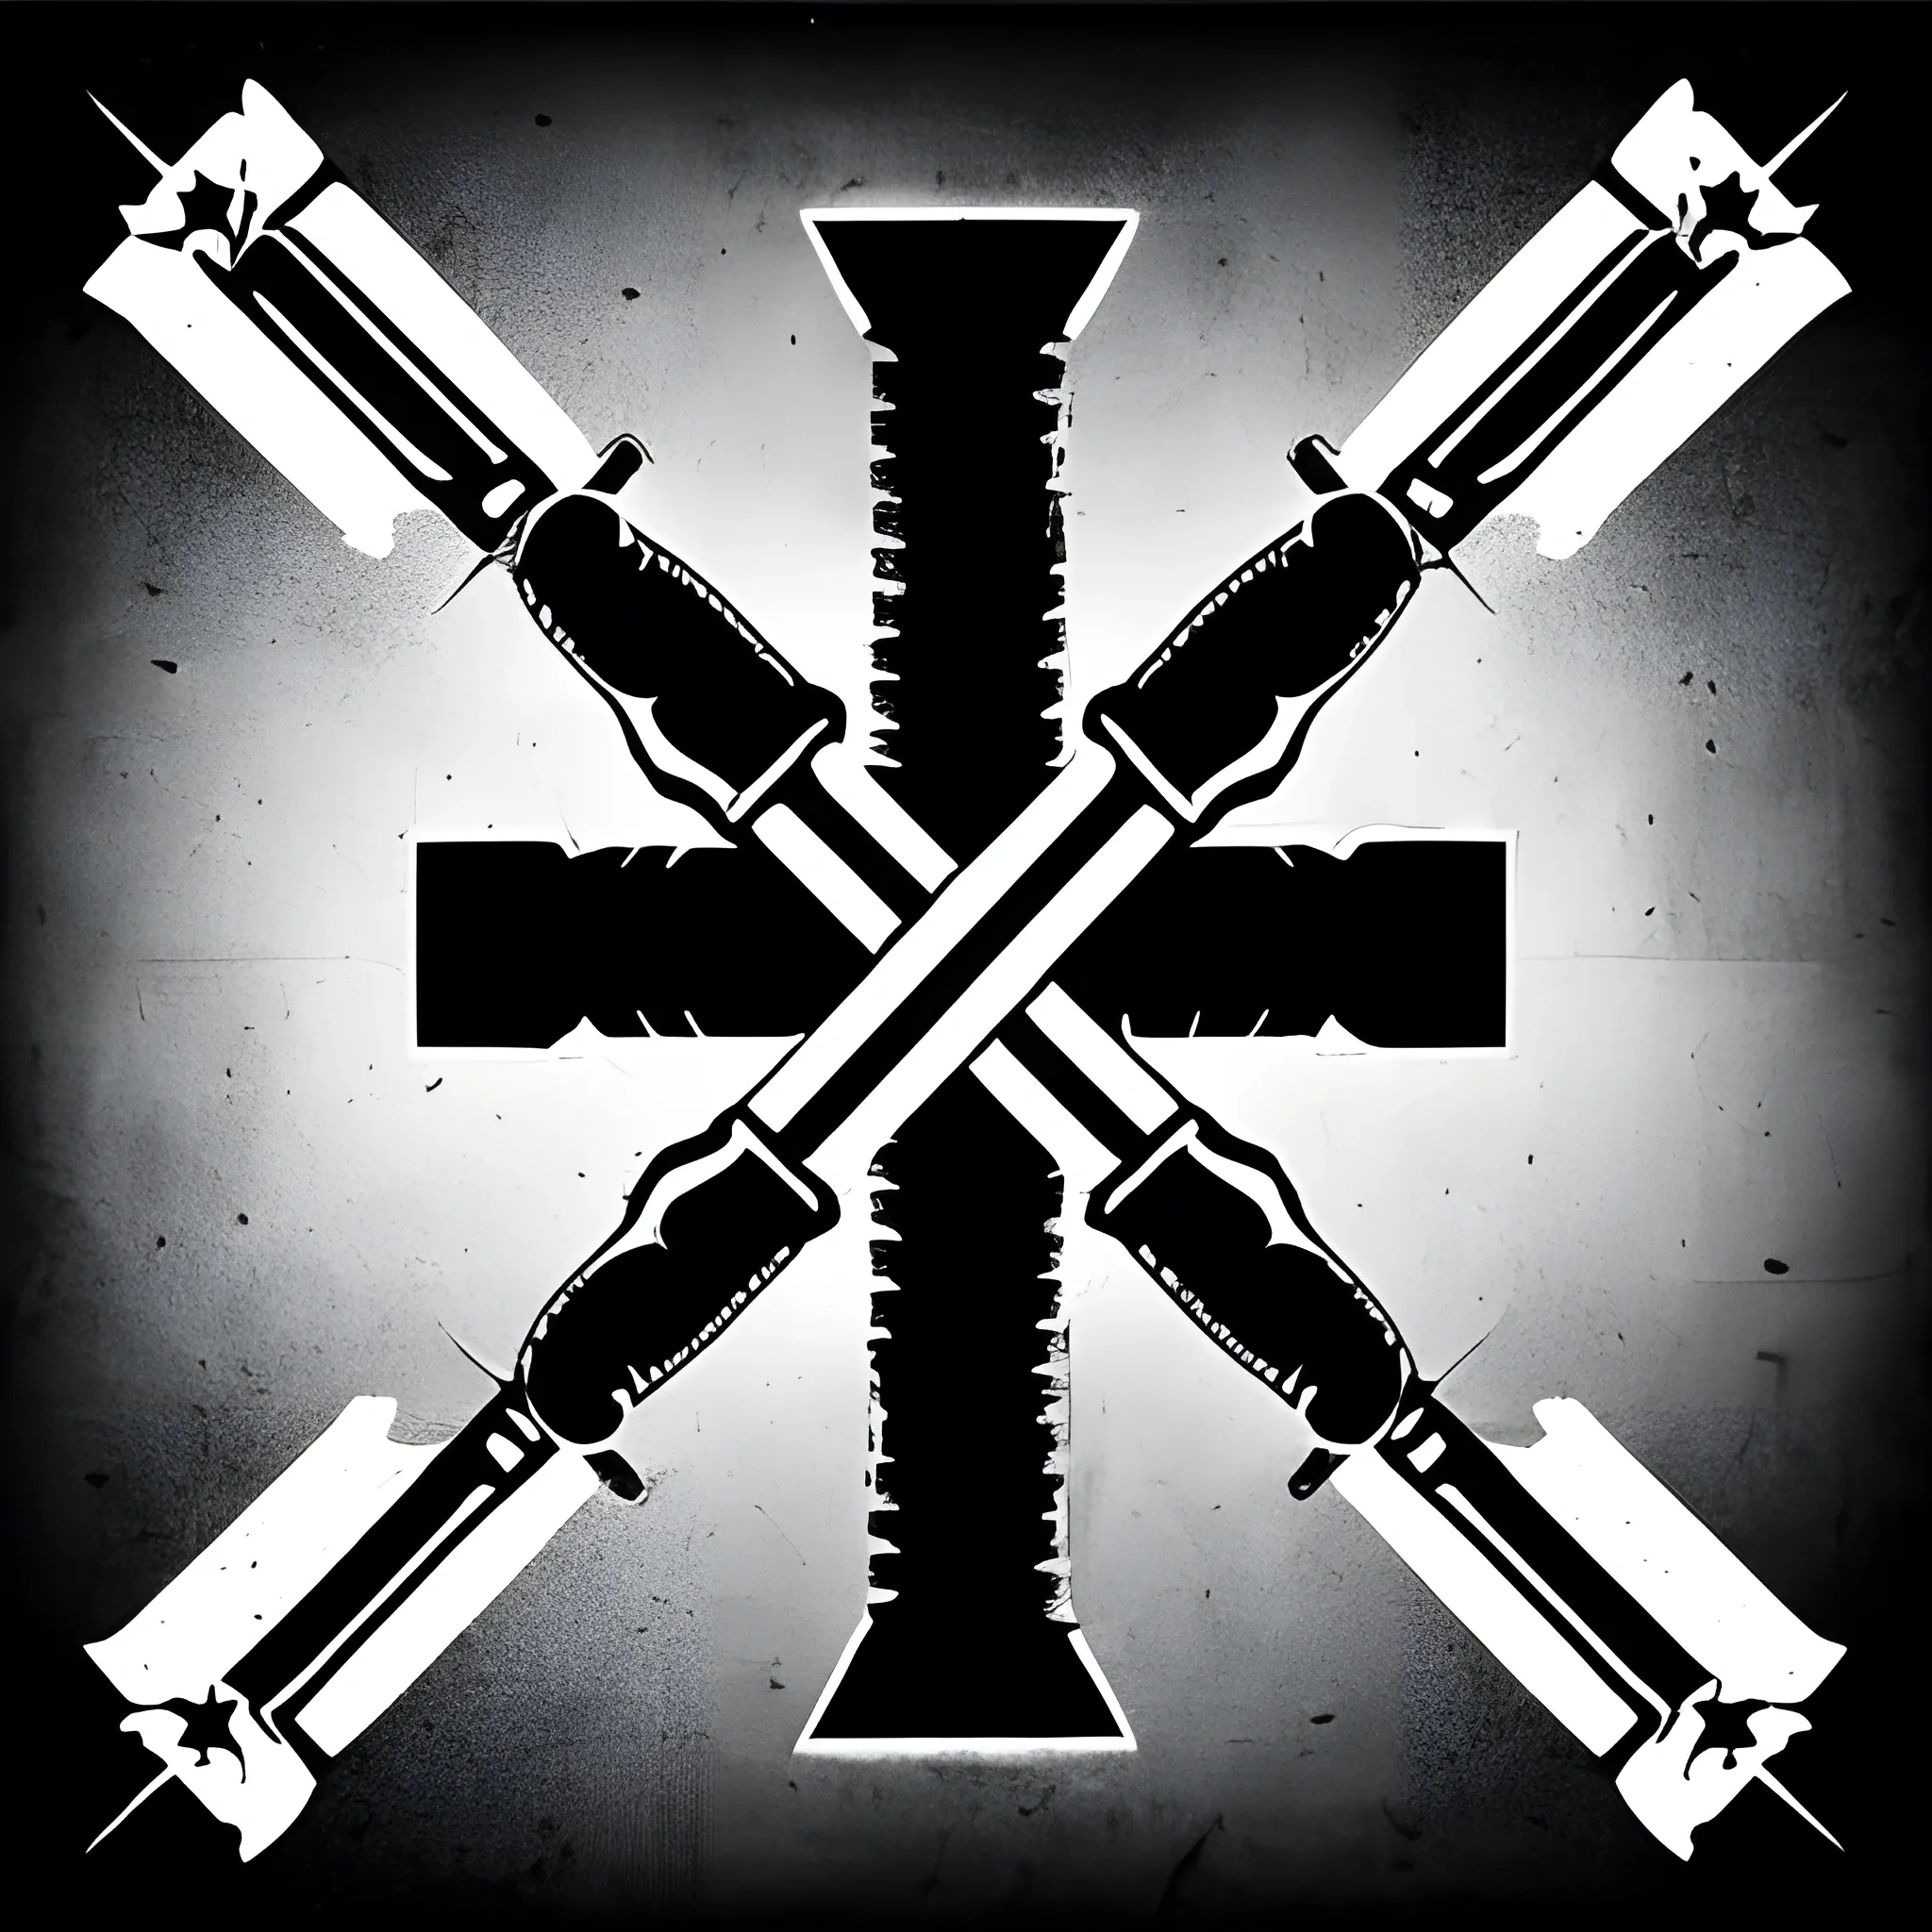 two guns crossed, look like axe, logo, black and white